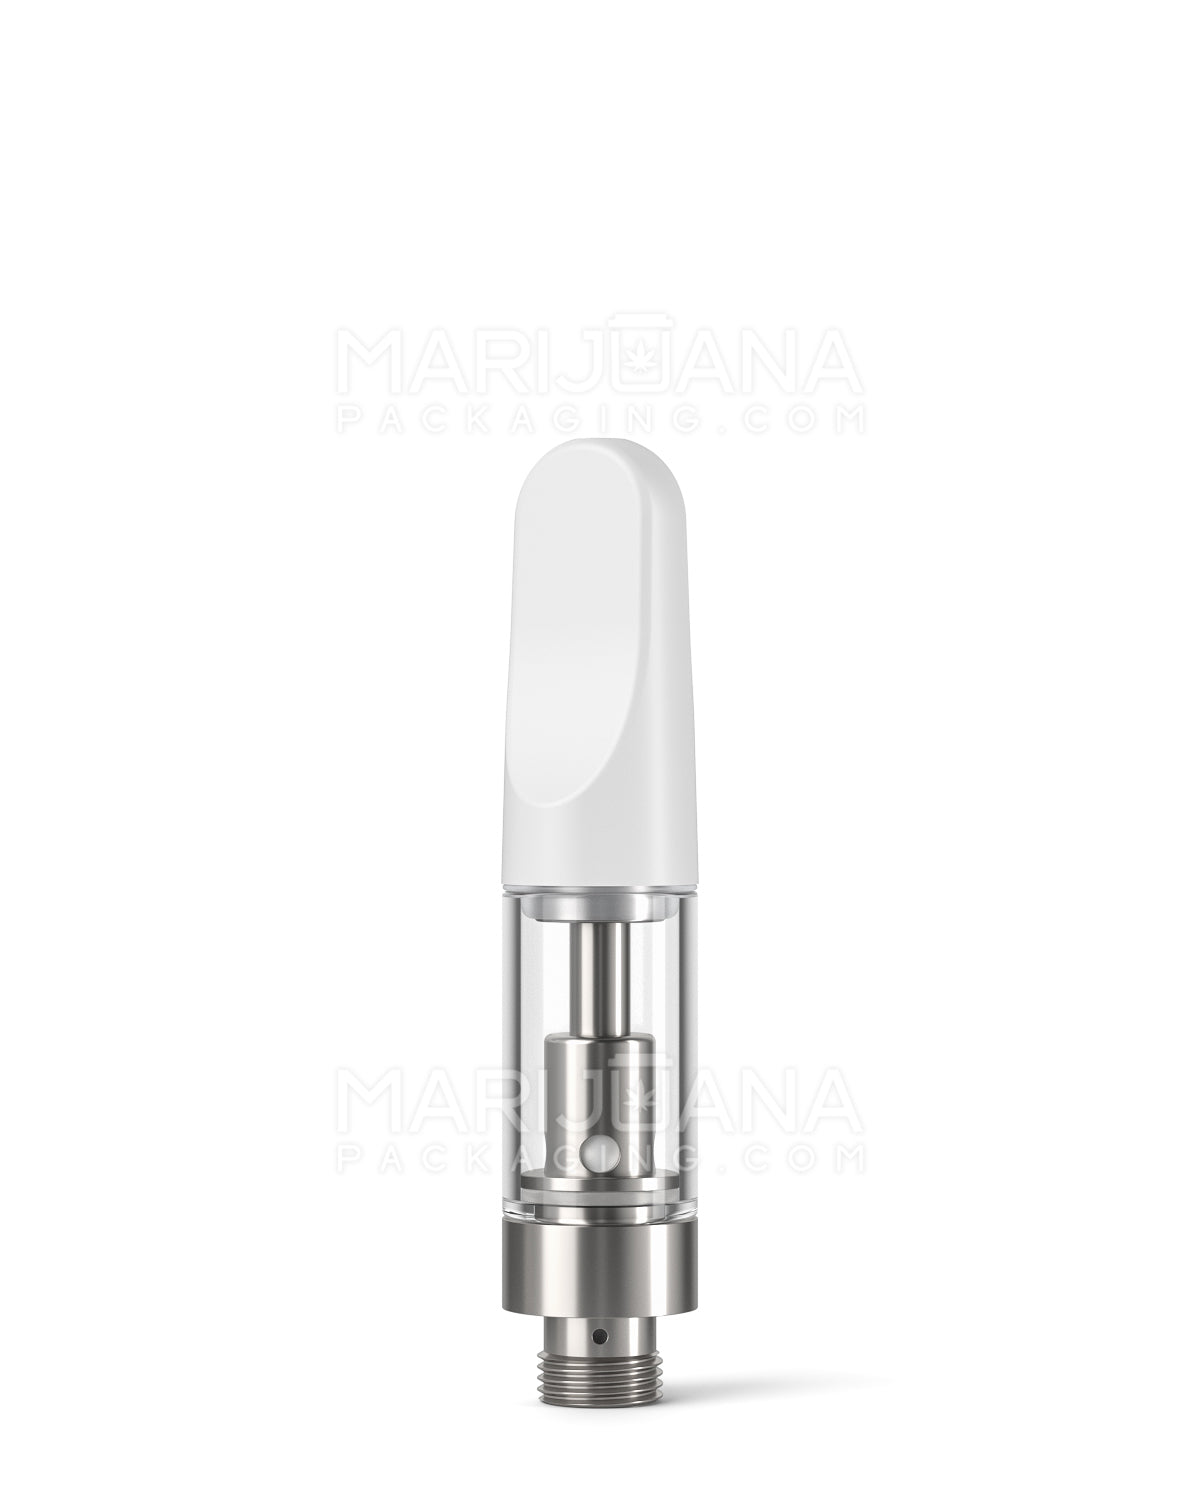 CCELL | Liquid6 Reactor Glass Vape Cartridge with White Plastic Mouthpiece | 0.5mL - Screw On - 100 Count - 1